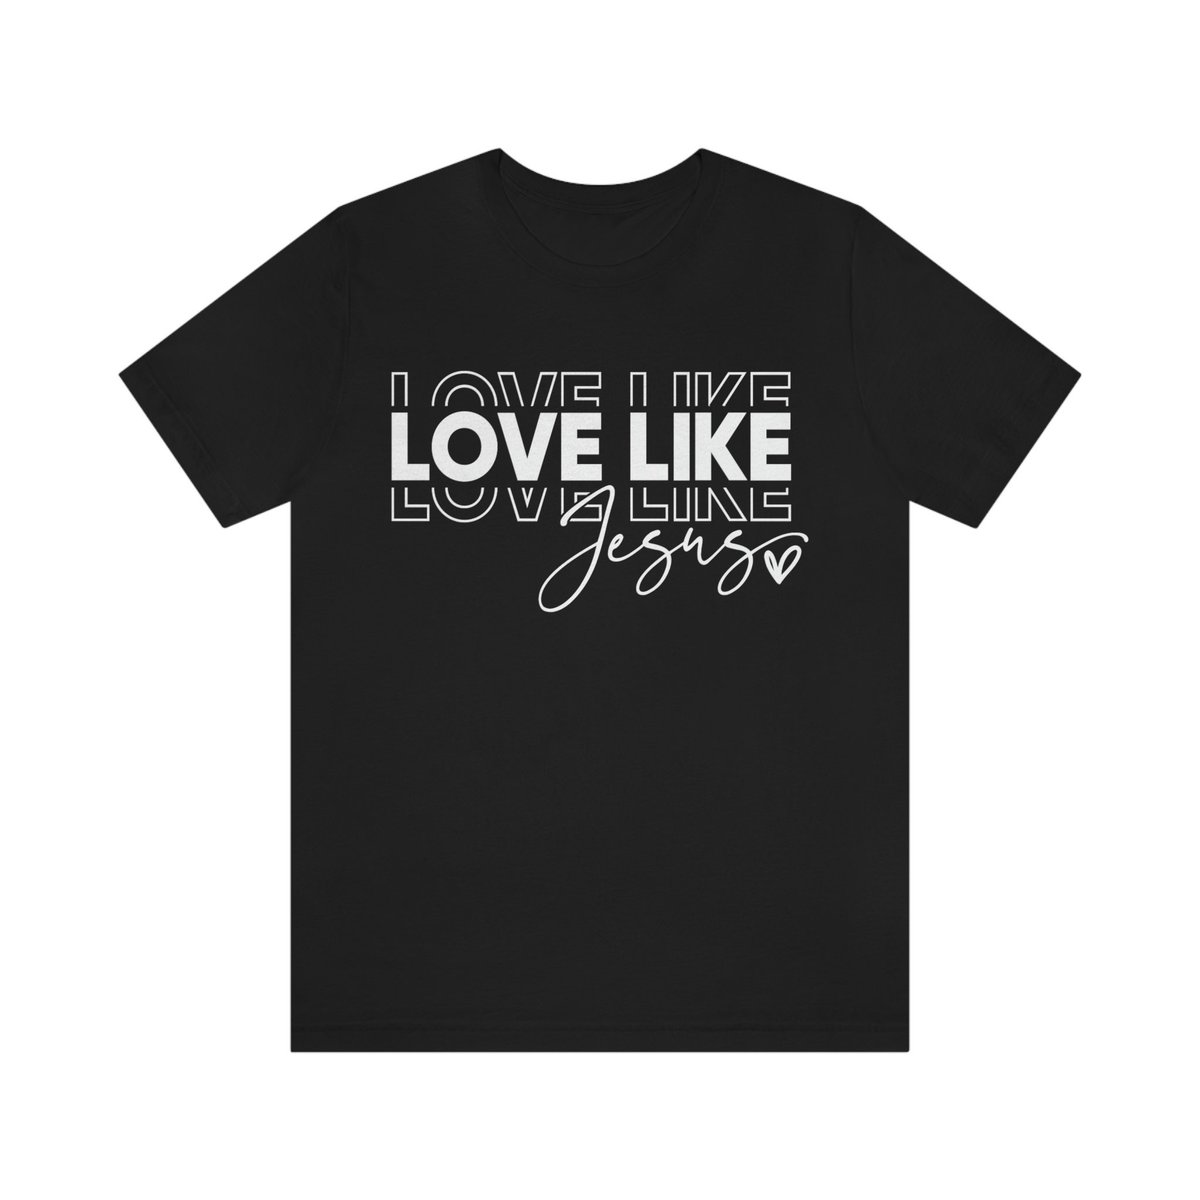 Excited to share the latest addition to my #etsy shop: Love like Jesus tShirt, Religious Shirt, Church Outfit, Prayer Shirt, God Lover Shirt, Christian Gift etsy.me/3Ylg2Wg #shortsleeve #christian #religious #momgift #friendgift #lovelikejesus #prayer #cross #g